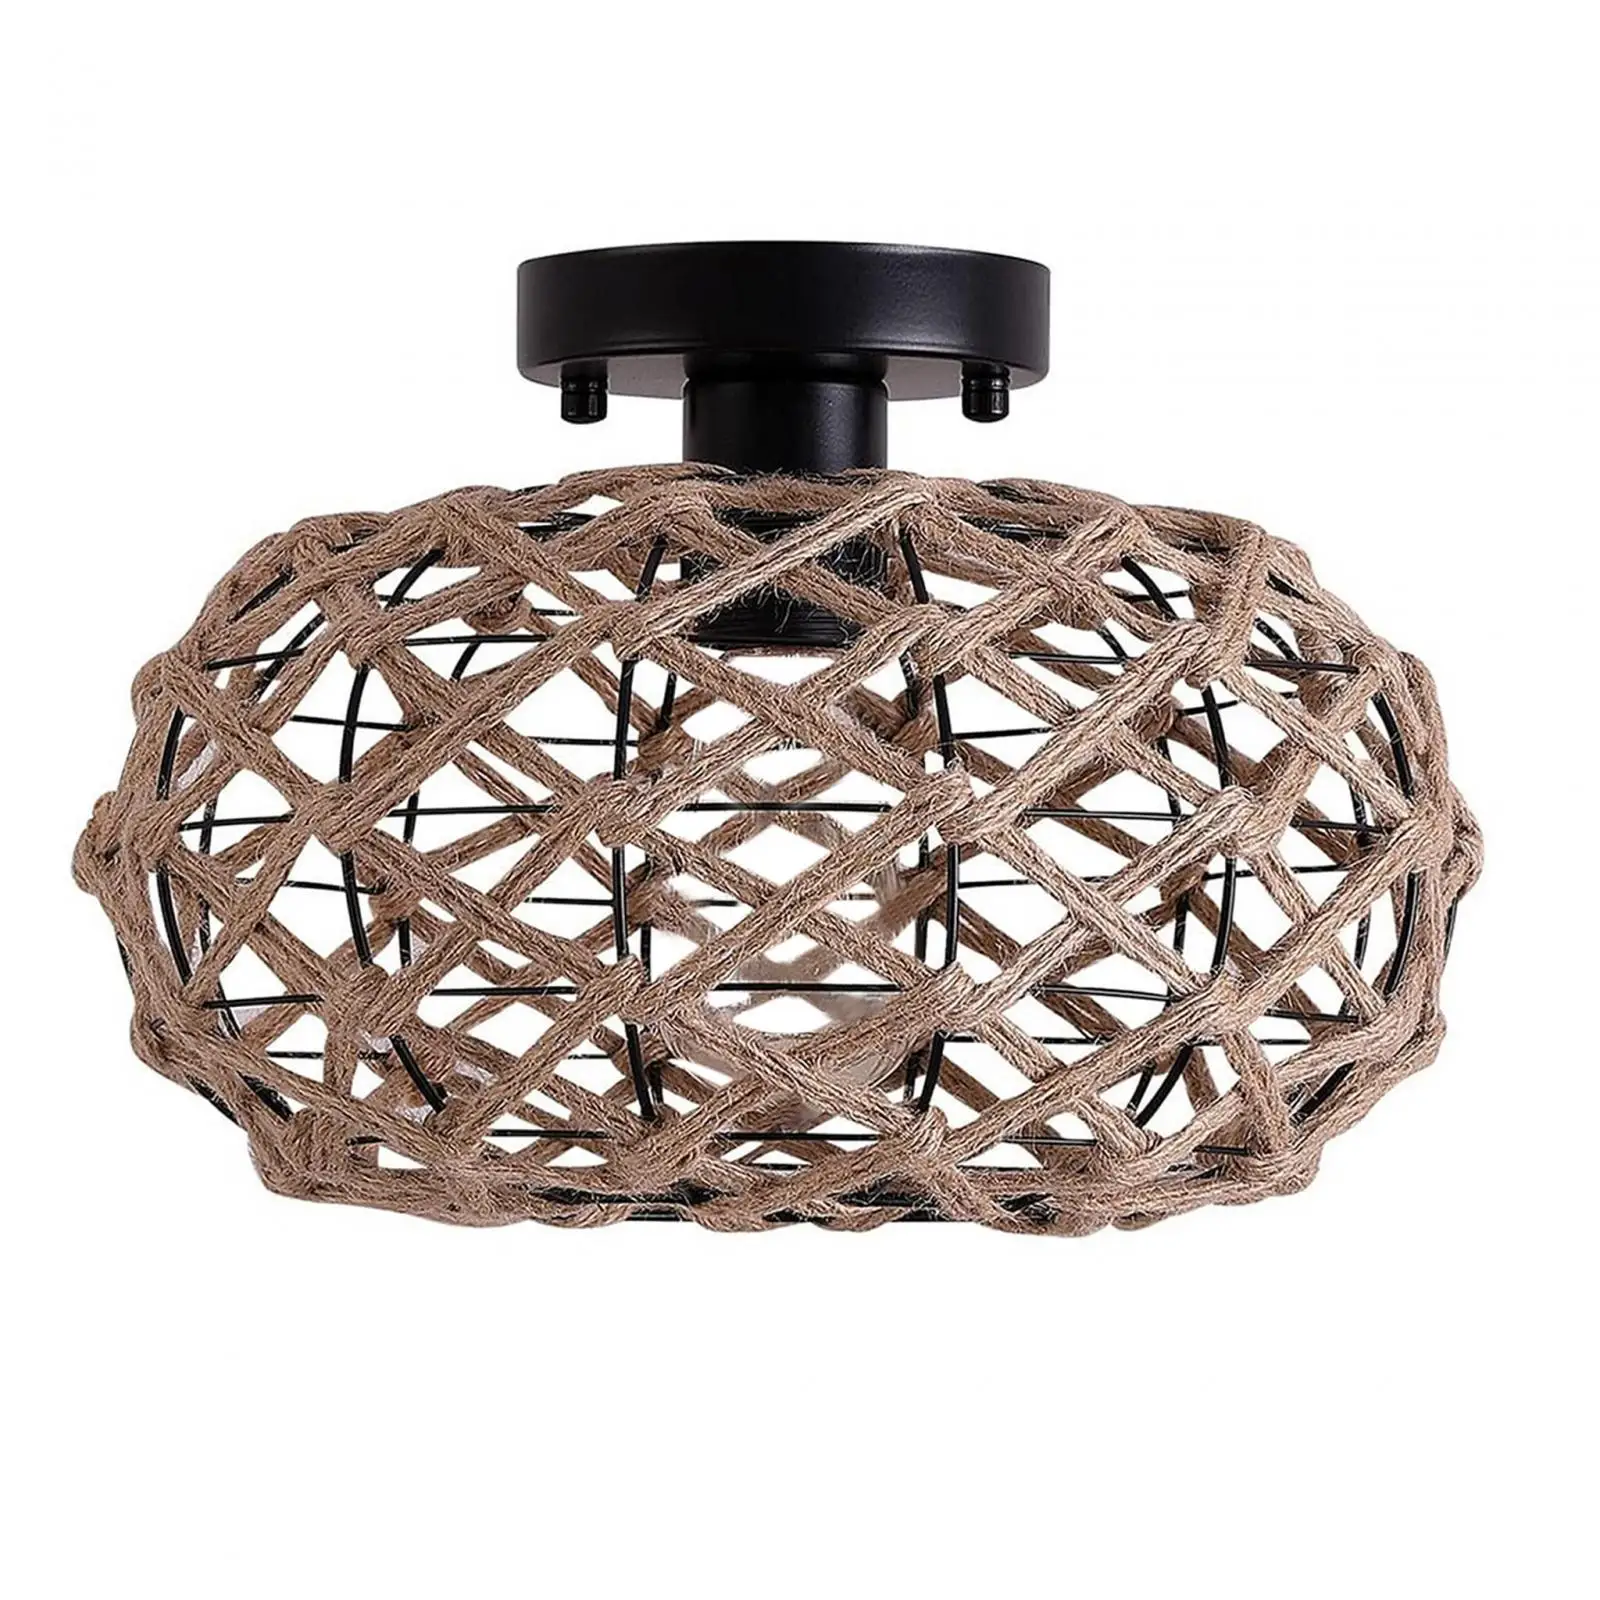 Woven Lampshade Farmhouse Light Fixture Rustic Hanging Pendant Lighting for Restaurant Bedroom Cafe Living Room Kitchen Island